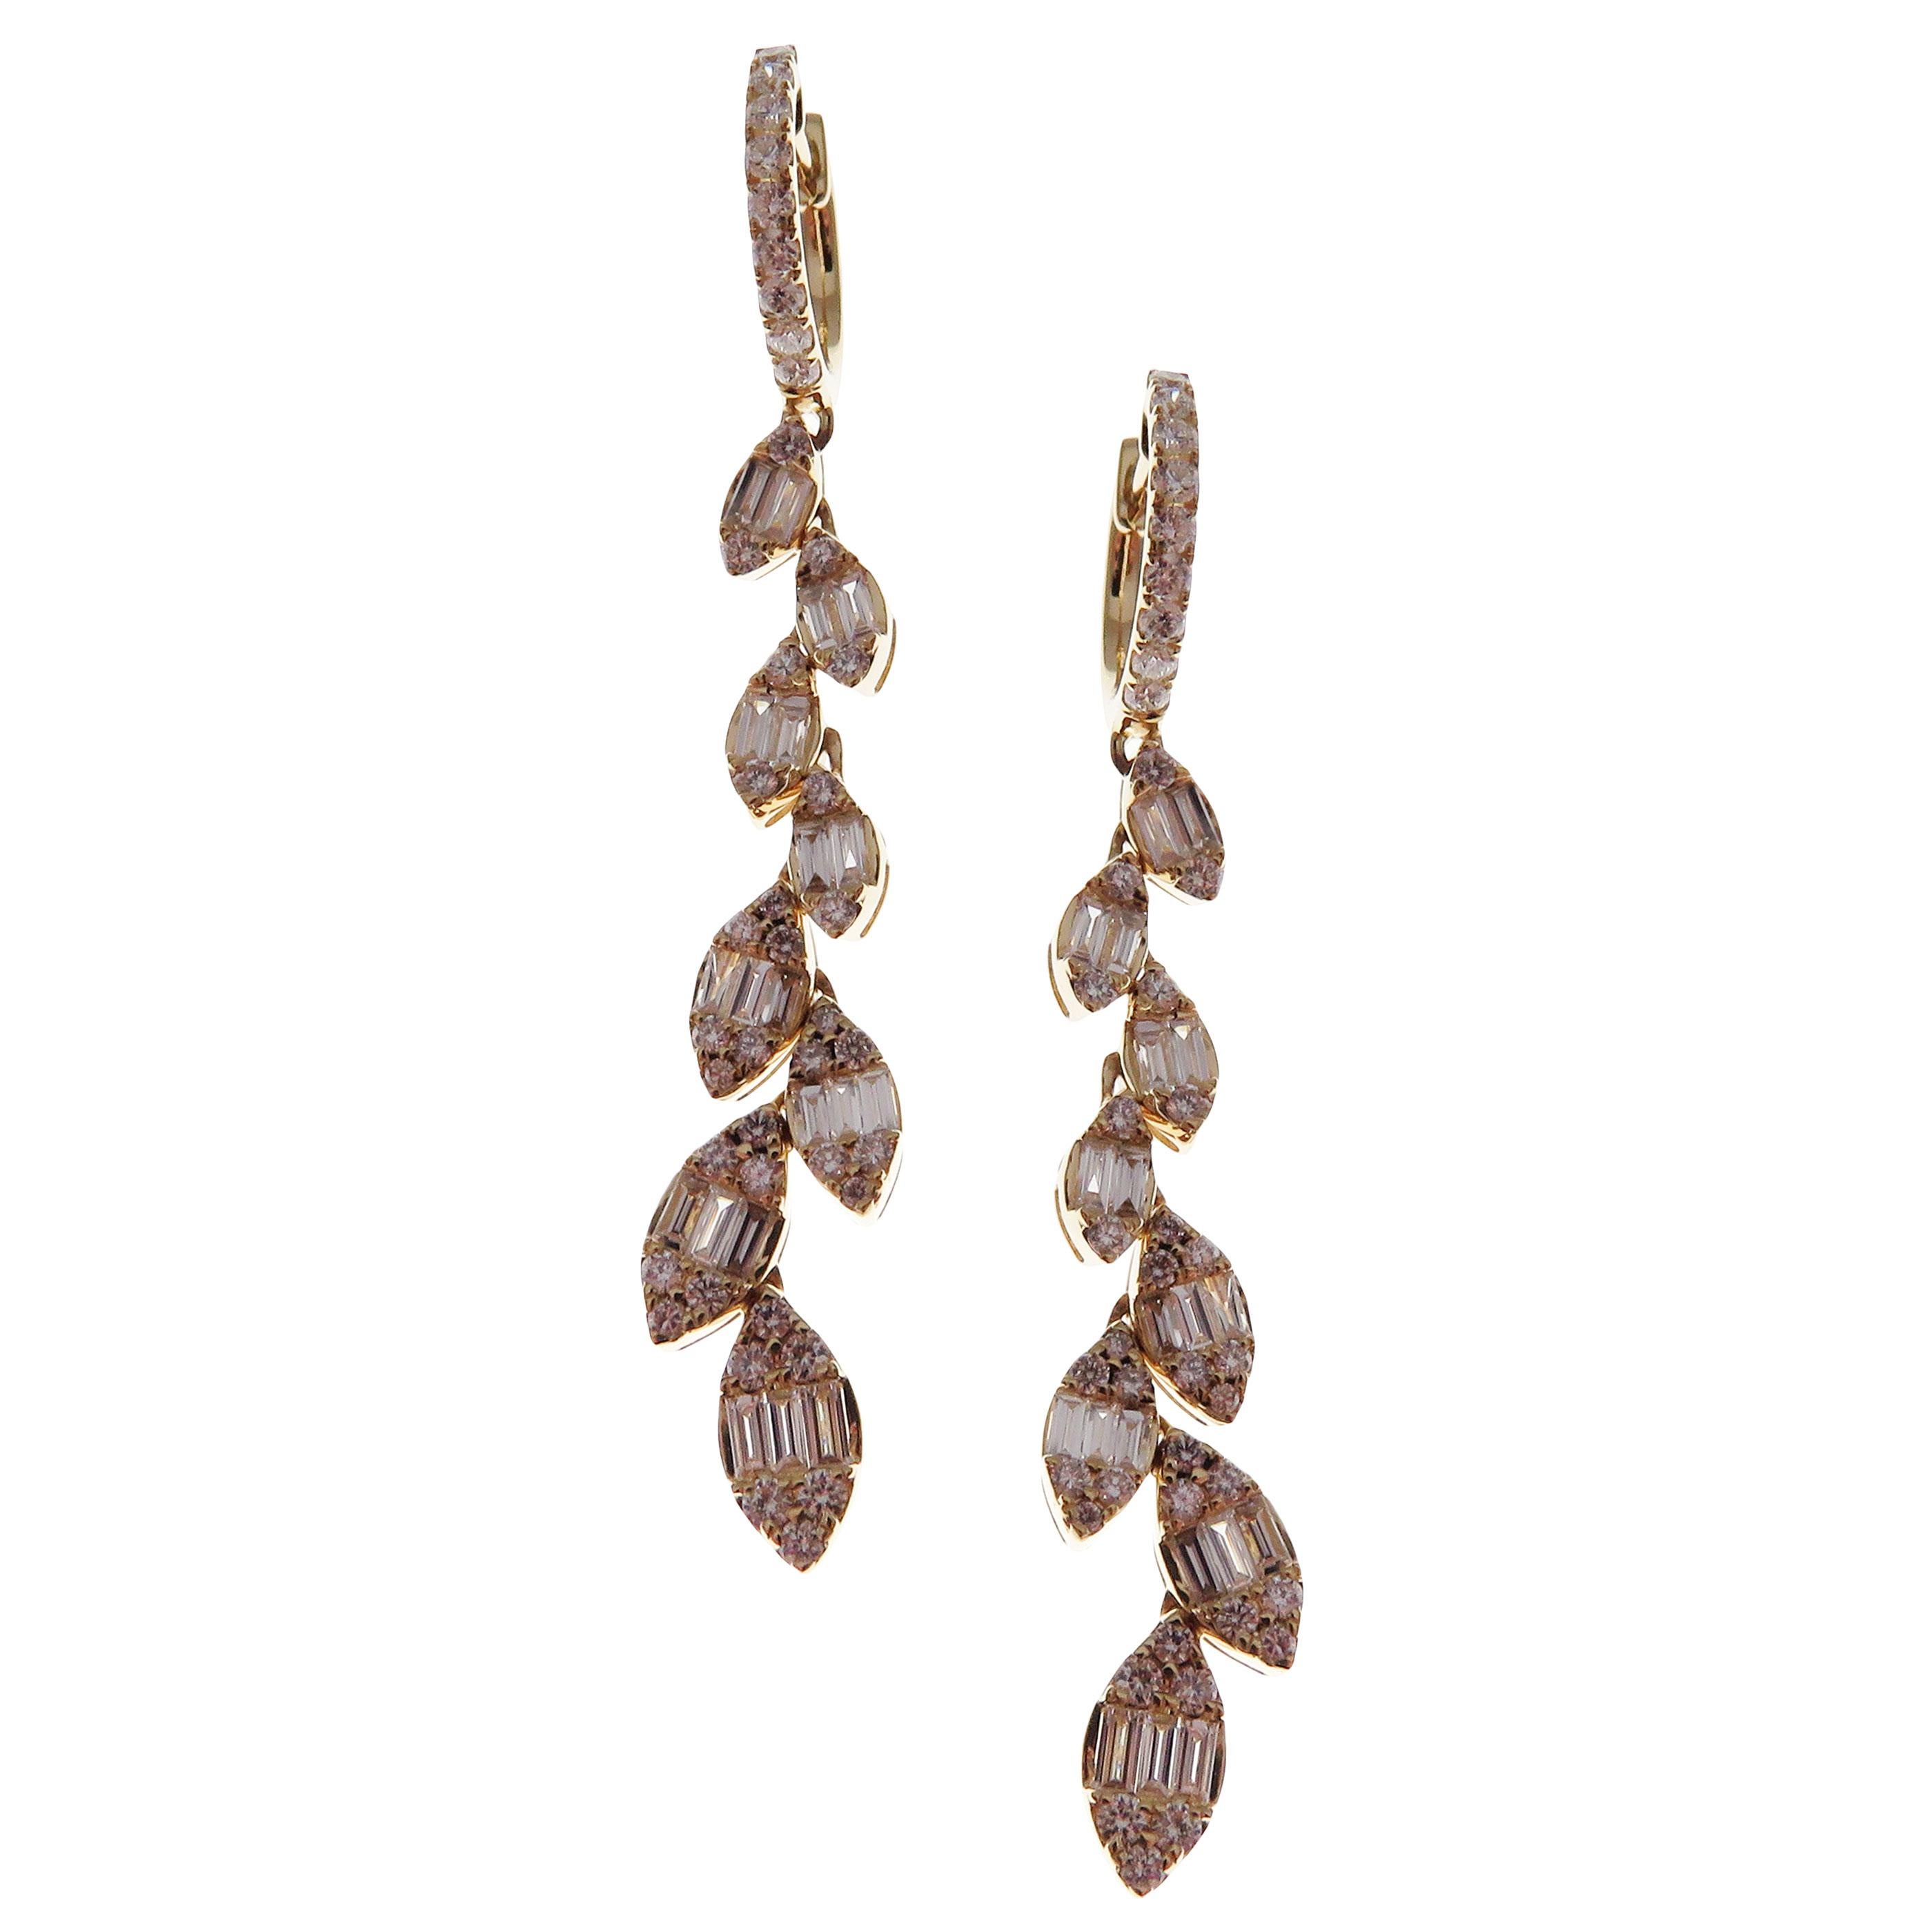 These trendy marquise-shaped linear earrings with white baguette diamonds are crafted in 18-karat yellow gold, featuring 82 round white diamonds totaling of 0.74 carats and 40 baguette white diamonds totaling of 0.67 carats.
These earrings come with